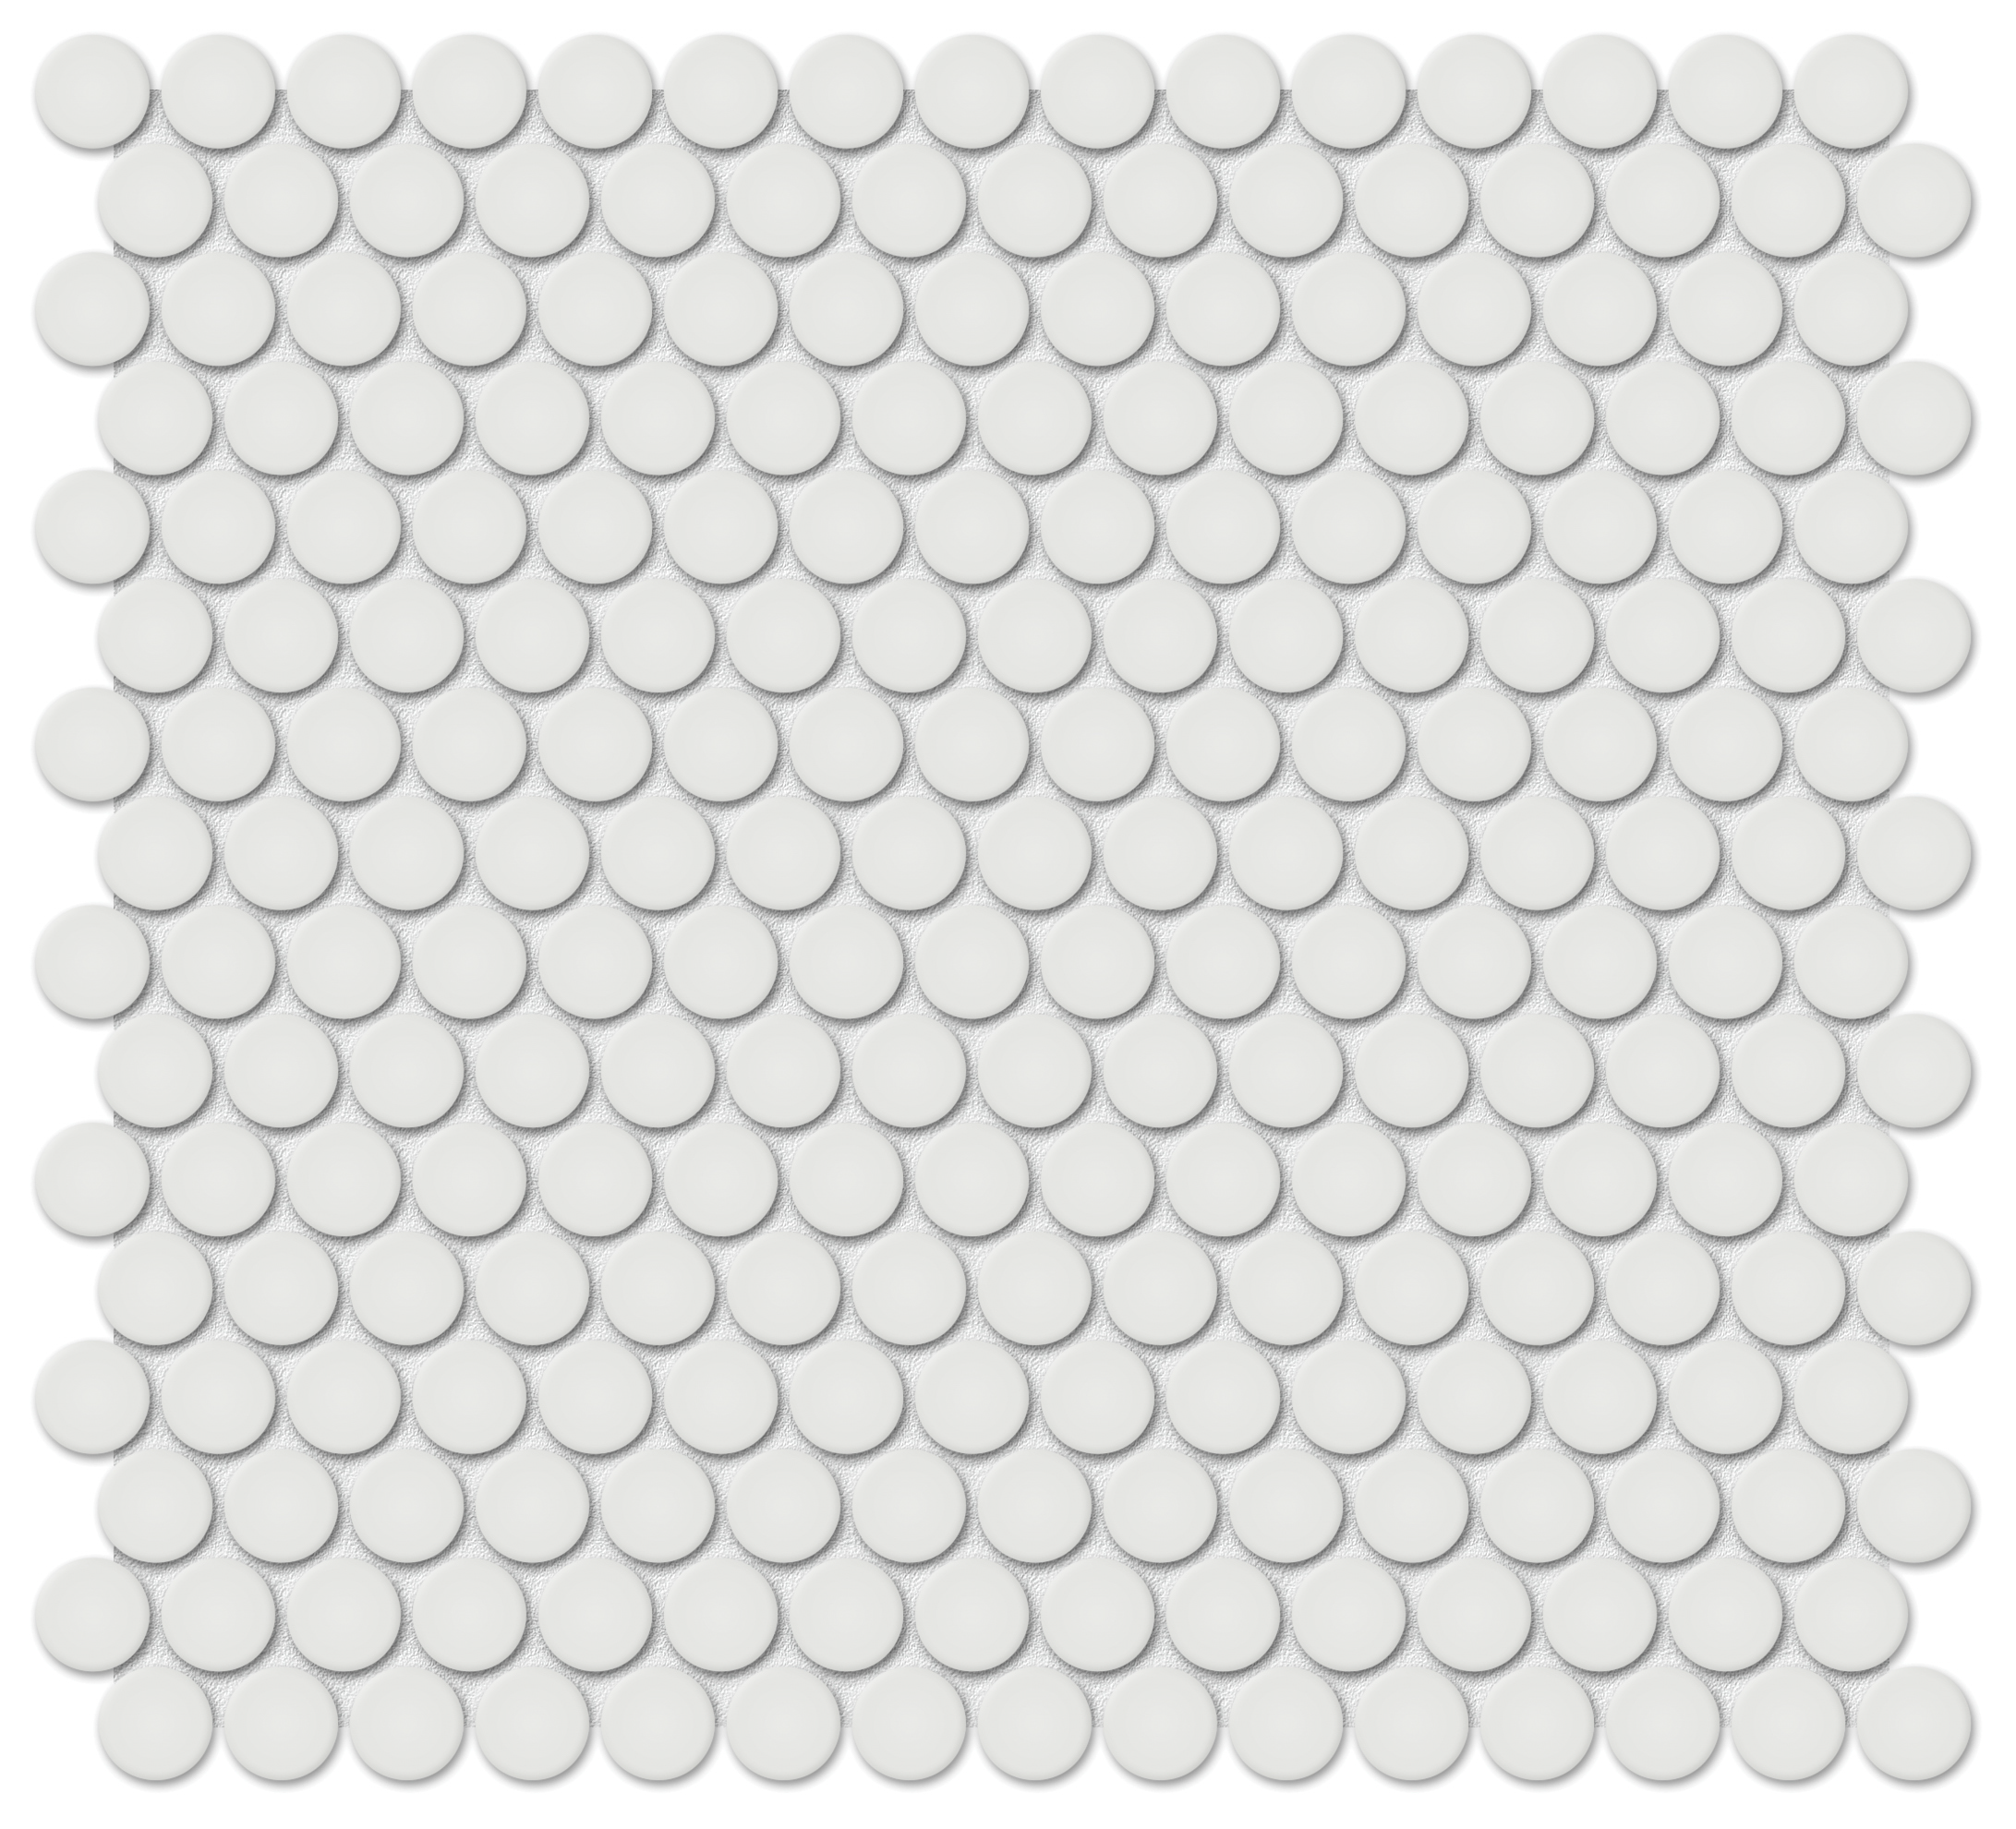 vintage grey penny round 3_4-inch pattern glazed porcelain mosaic from soho anatolia collection distributed by surface group international glossy finish pressed edge mesh shape